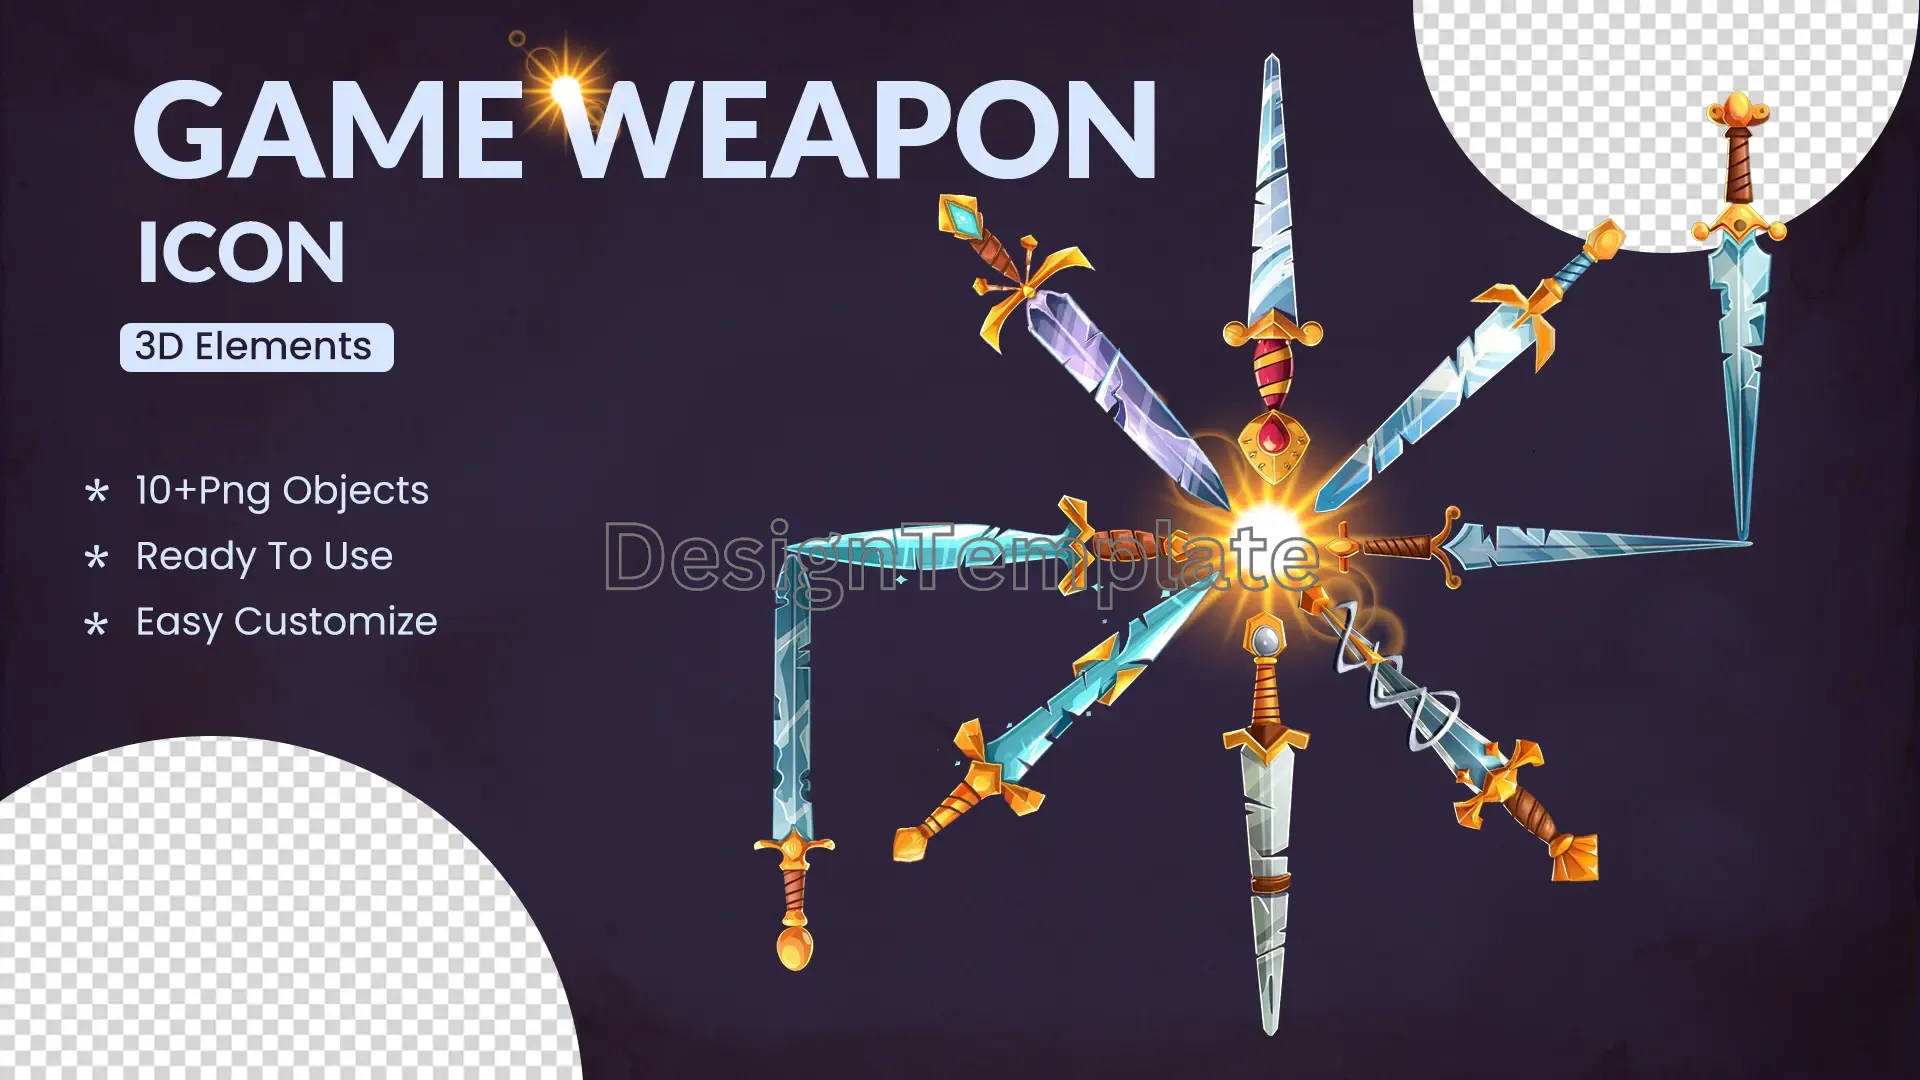 Arsenal Expansion Additional 3D Game Weapon Icons